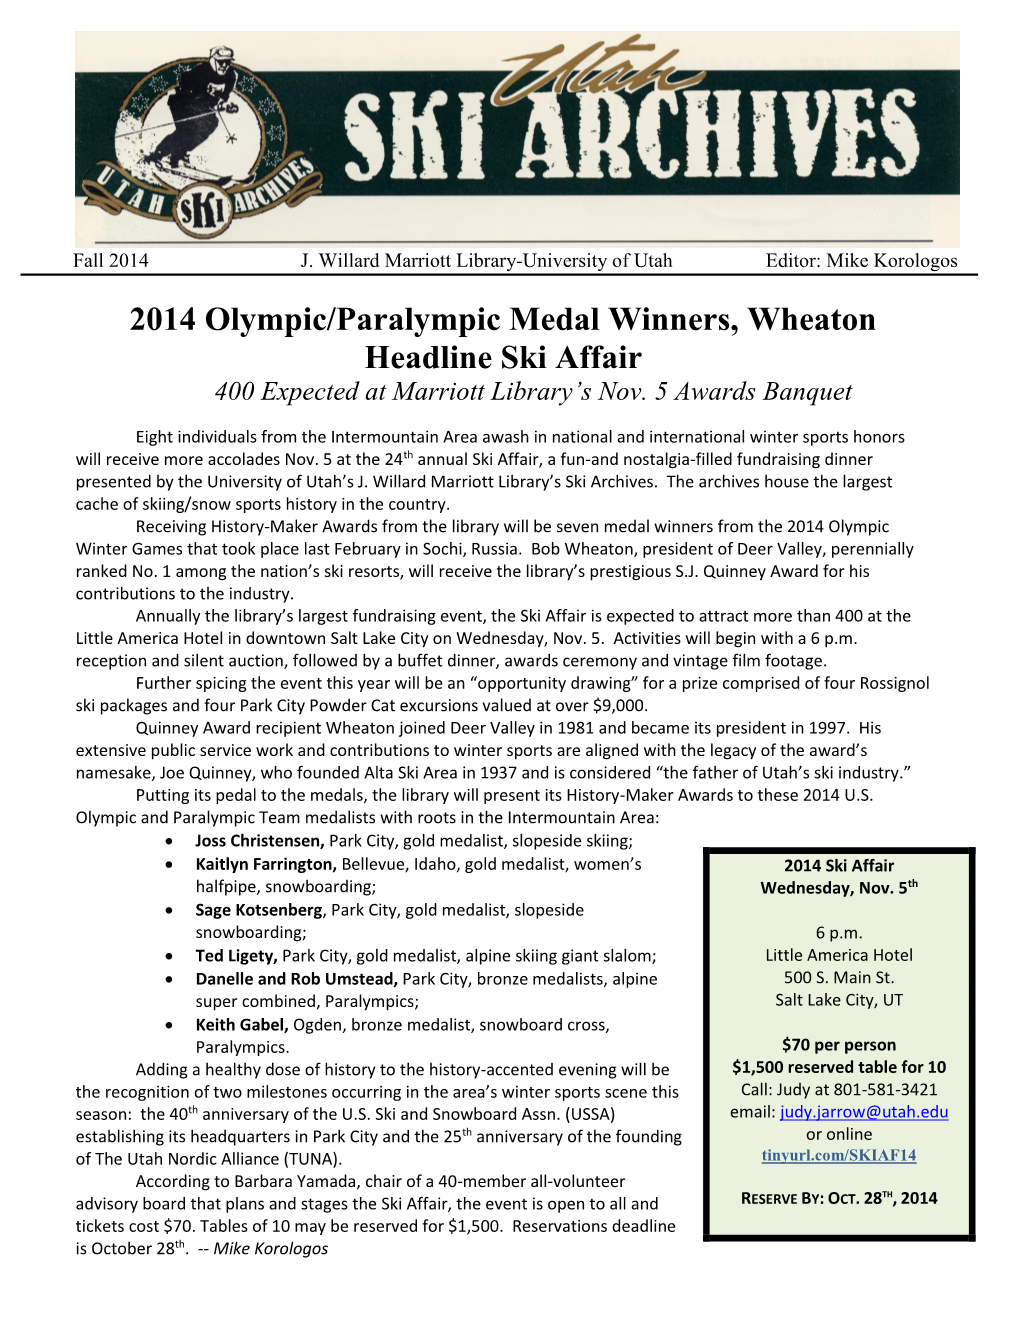 2014 Olympic/Paralympic Medal Winners, Wheaton Headline Ski Affair 400 Expected at Marriott Library’S Nov